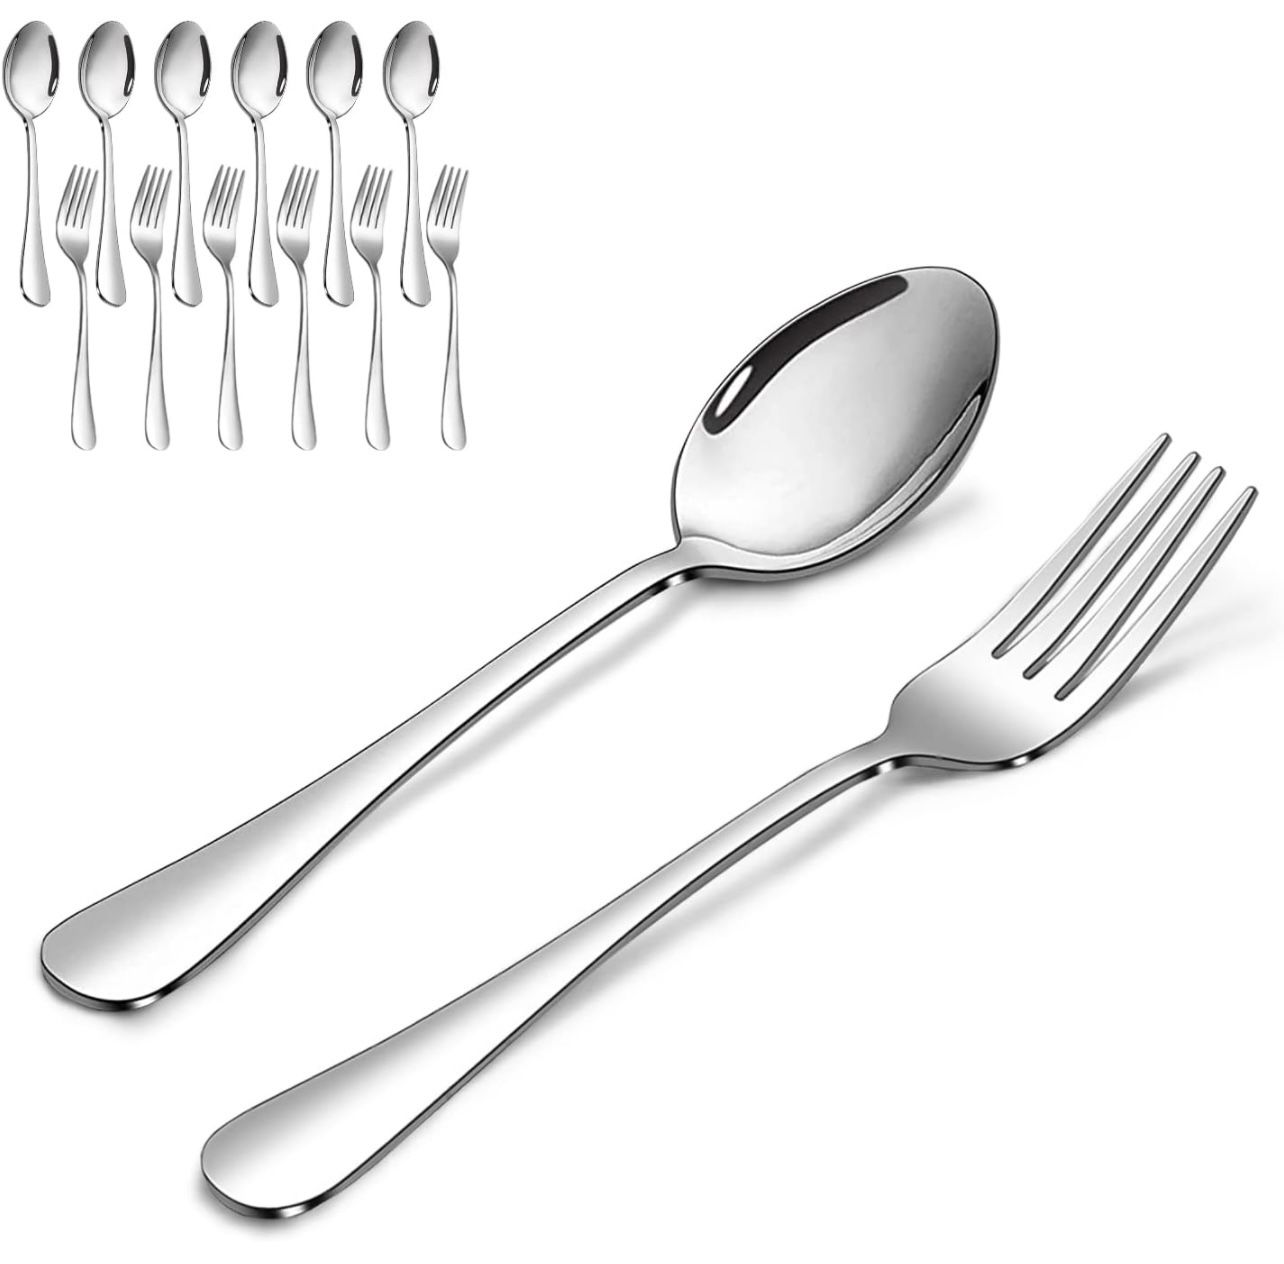 Spoon and Fork Set of 12, 6PCS Stainless Steel Dinner Forks and 6PCS Spoons Silverware Set, Dishwasher Safe (Silver 7.3 Inch)